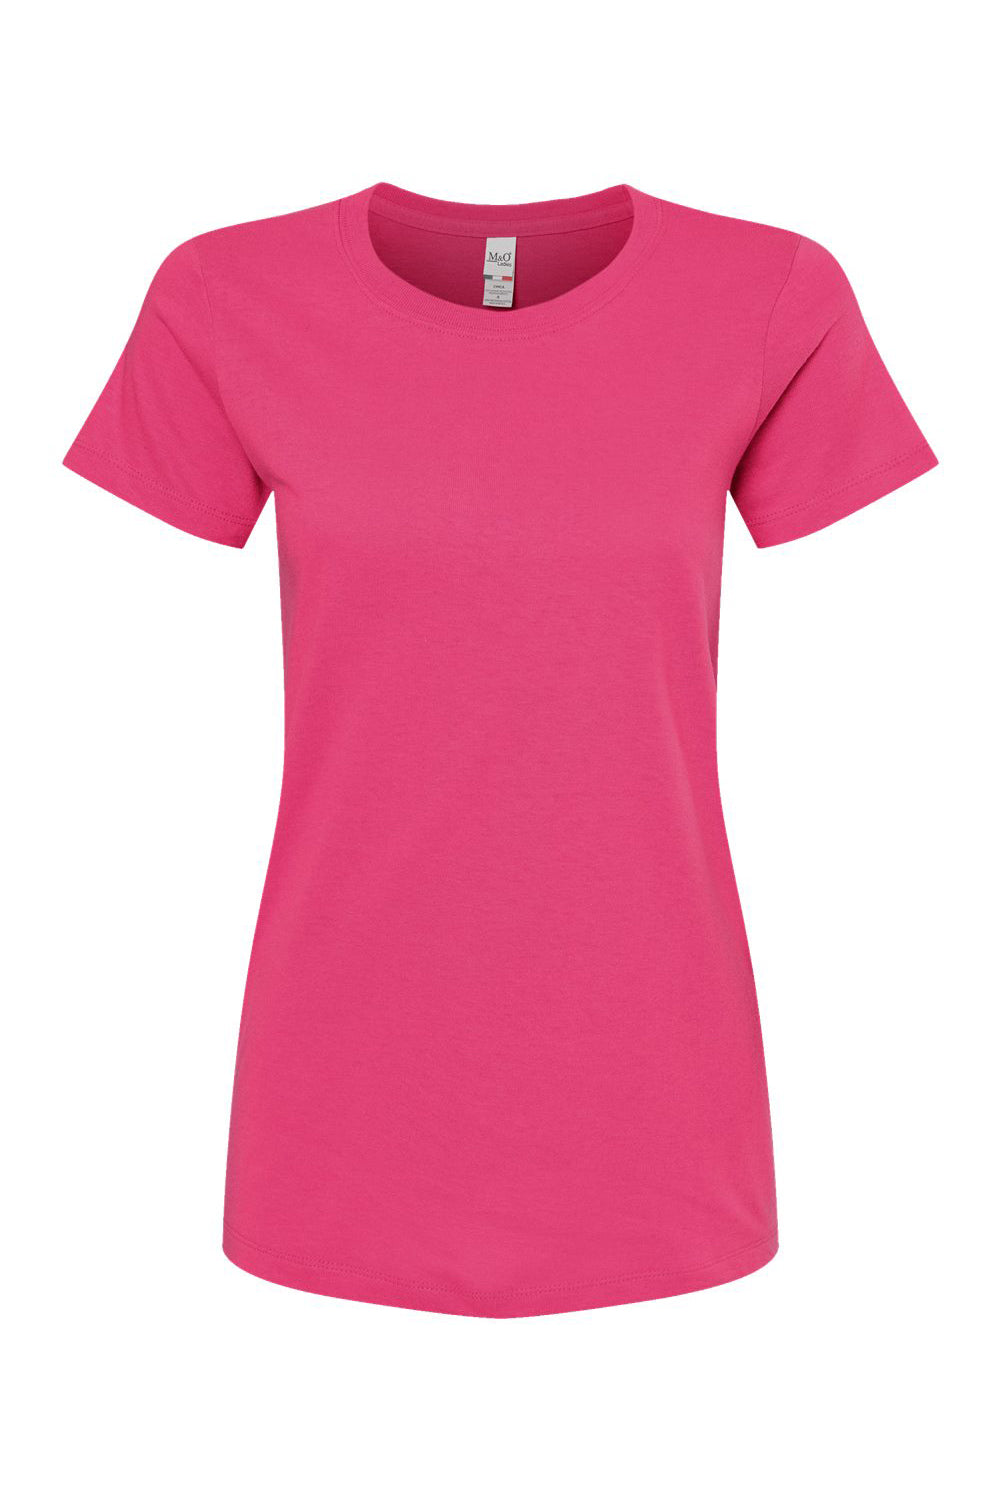 M&O 4810 Womens Gold Soft Touch Short Sleeve Crewneck T-Shirt Heliconia Pink Flat Front